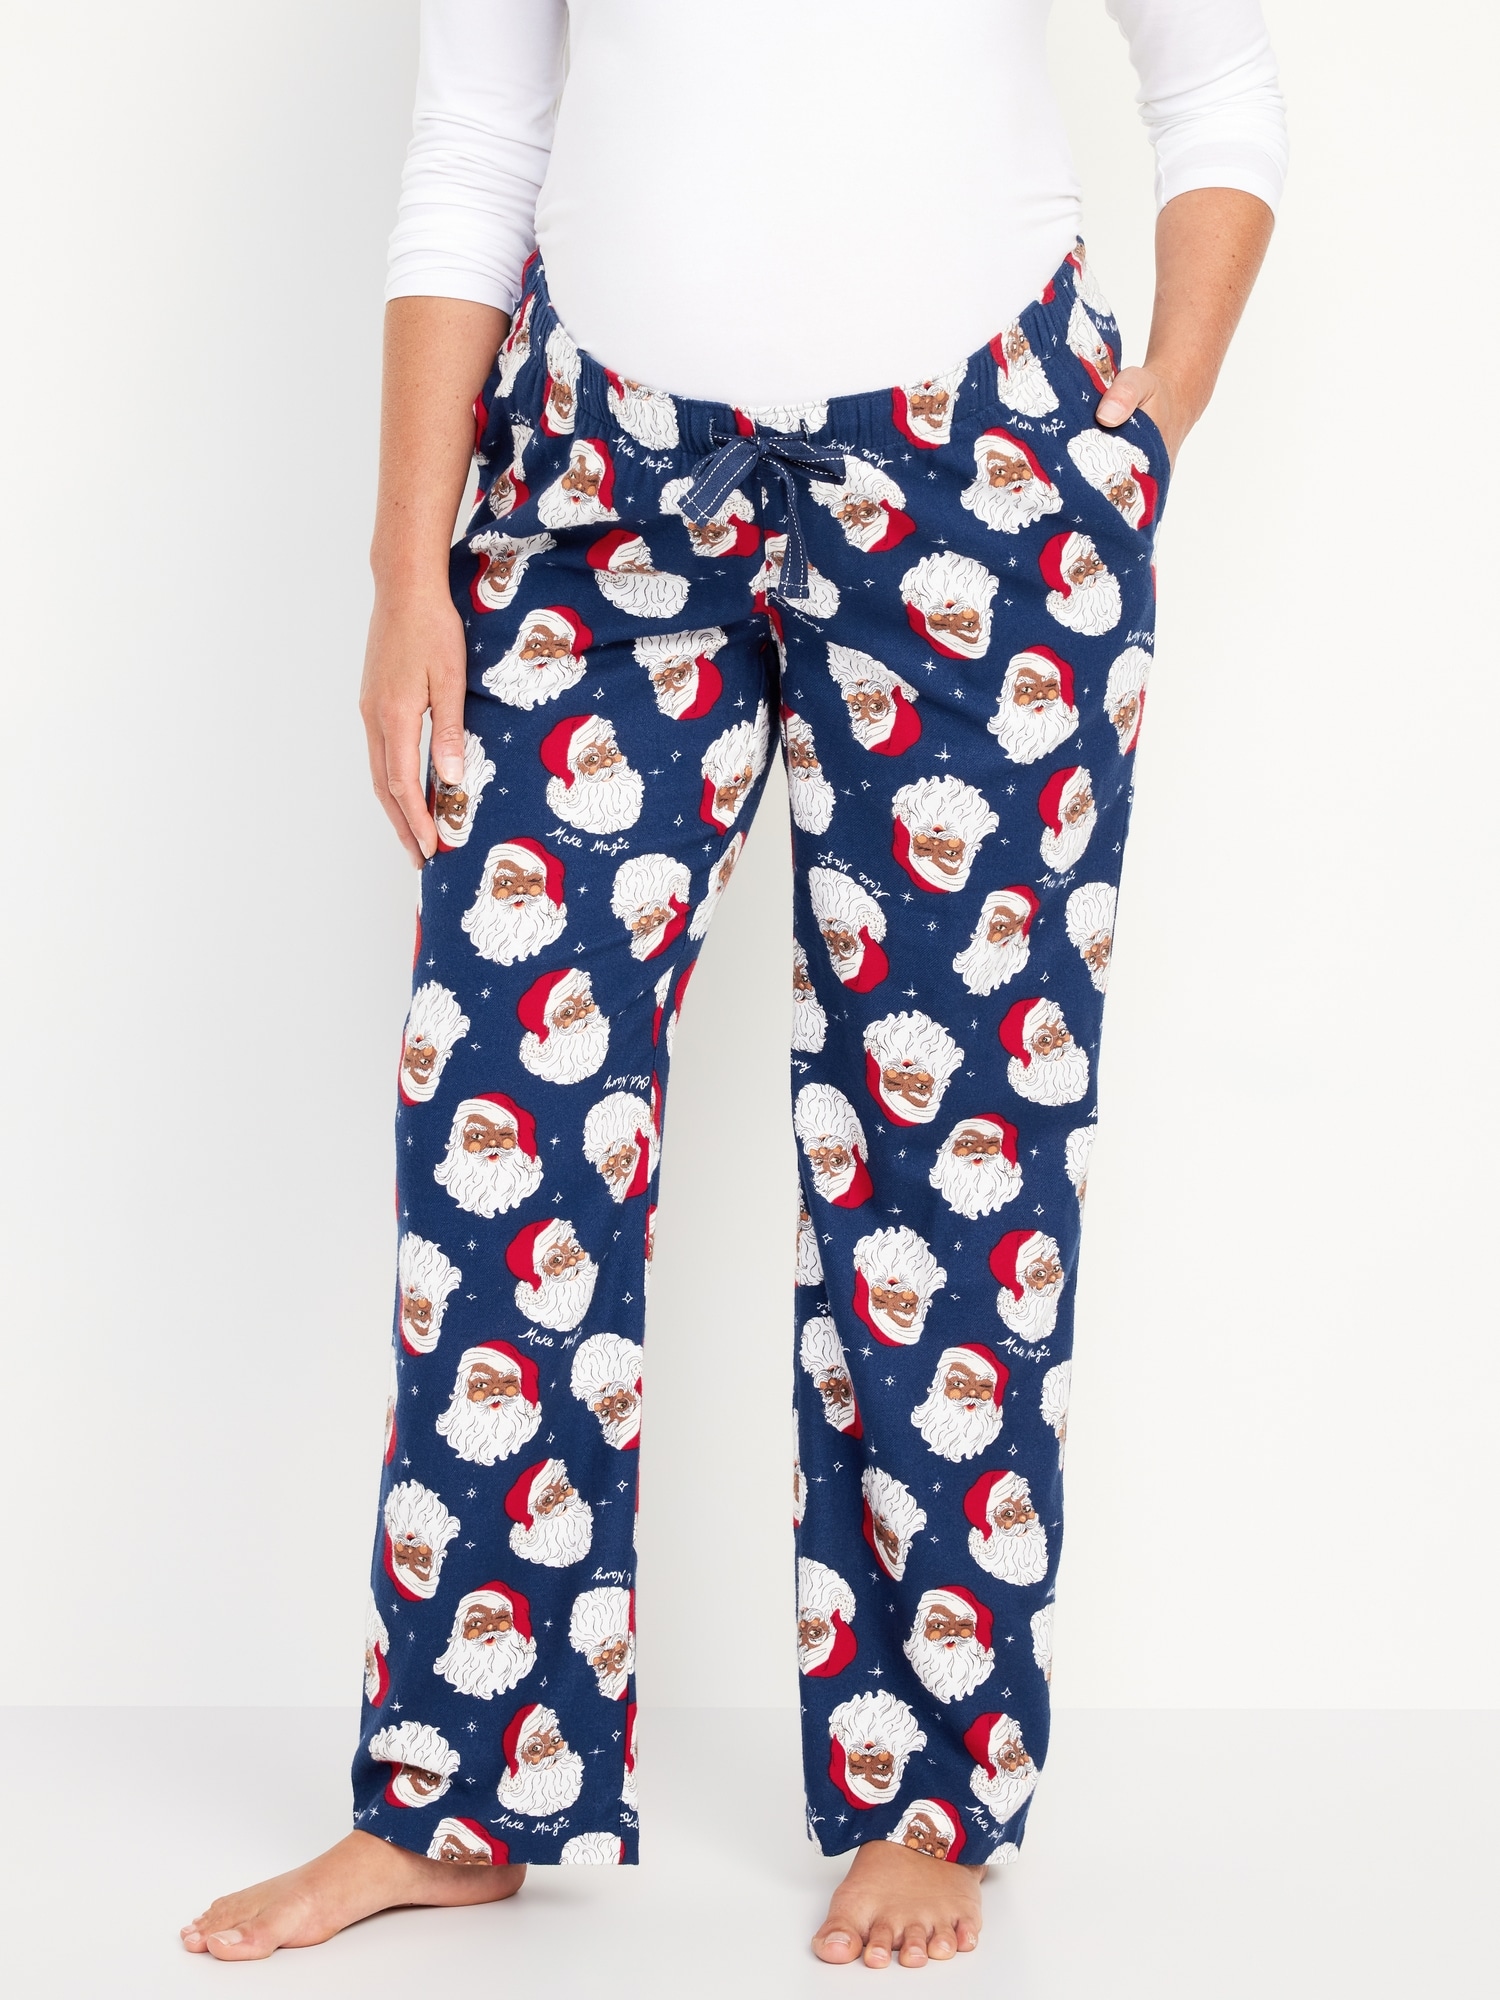 Double-Brushed Flannel Pajama Pants For Men